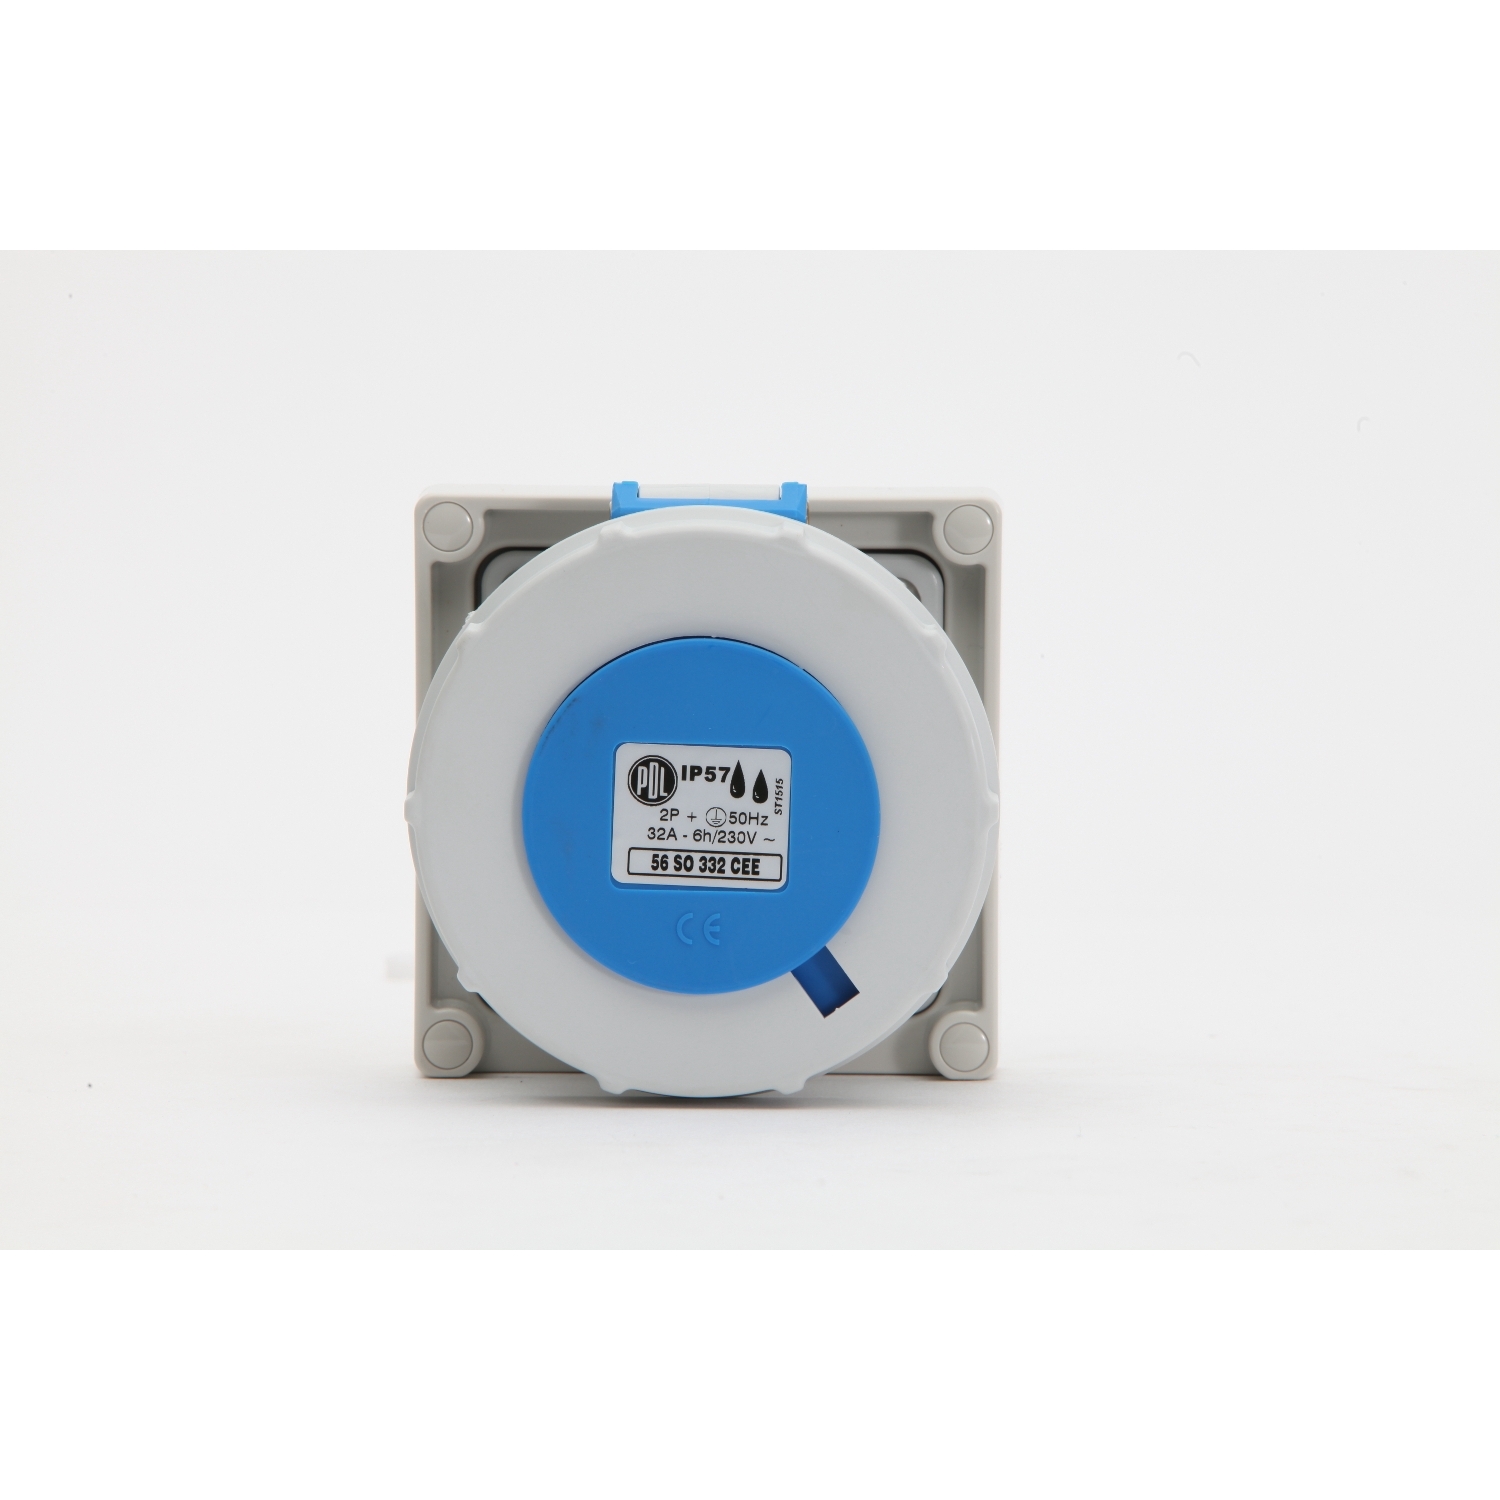 PDL 56 Series - Socket CEE 32A 230V 1-Phase 3-Round Pin IP57 - Grey Blue